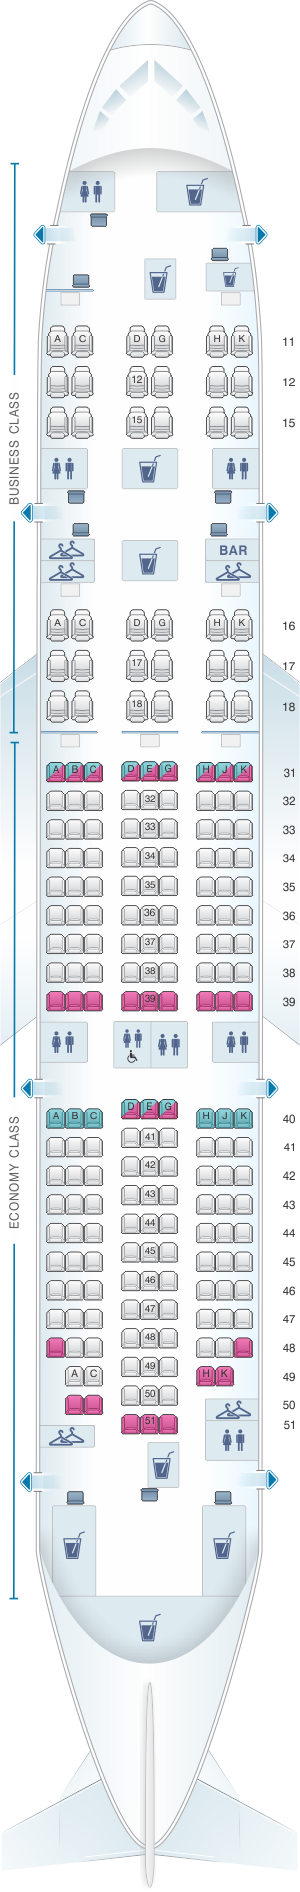 Seat map for Hainan Airlines Boeing B787-8